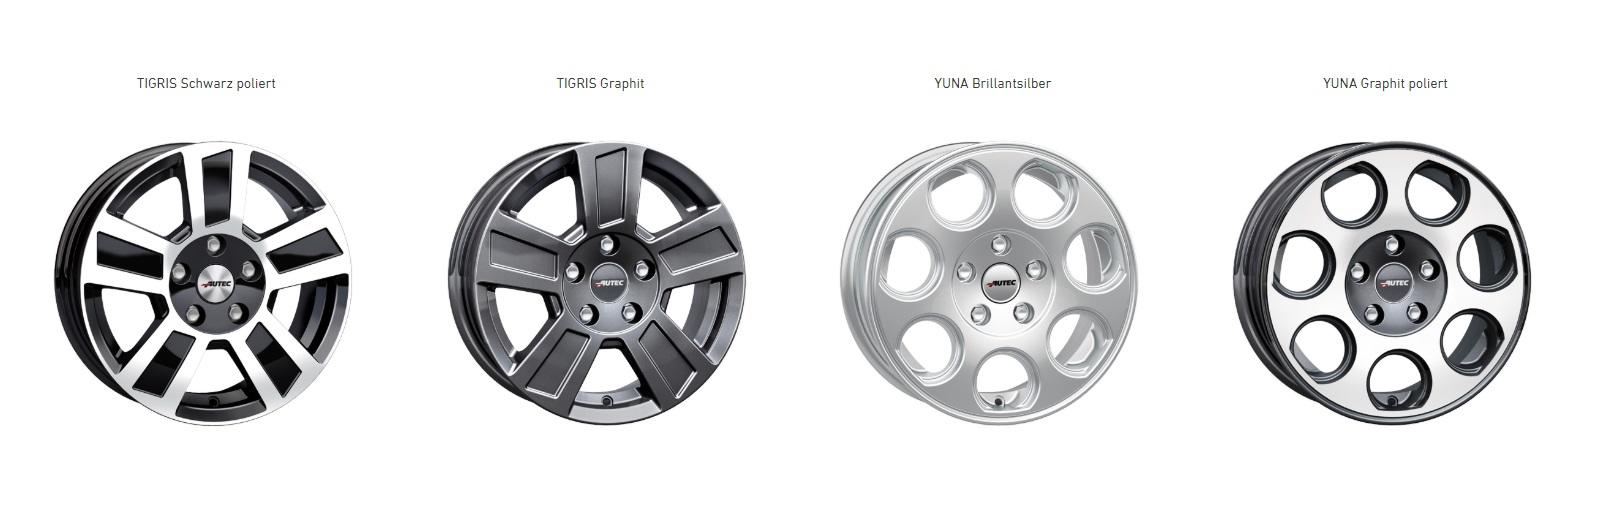 Trailers with chic: Autec trailer rims make it possible!